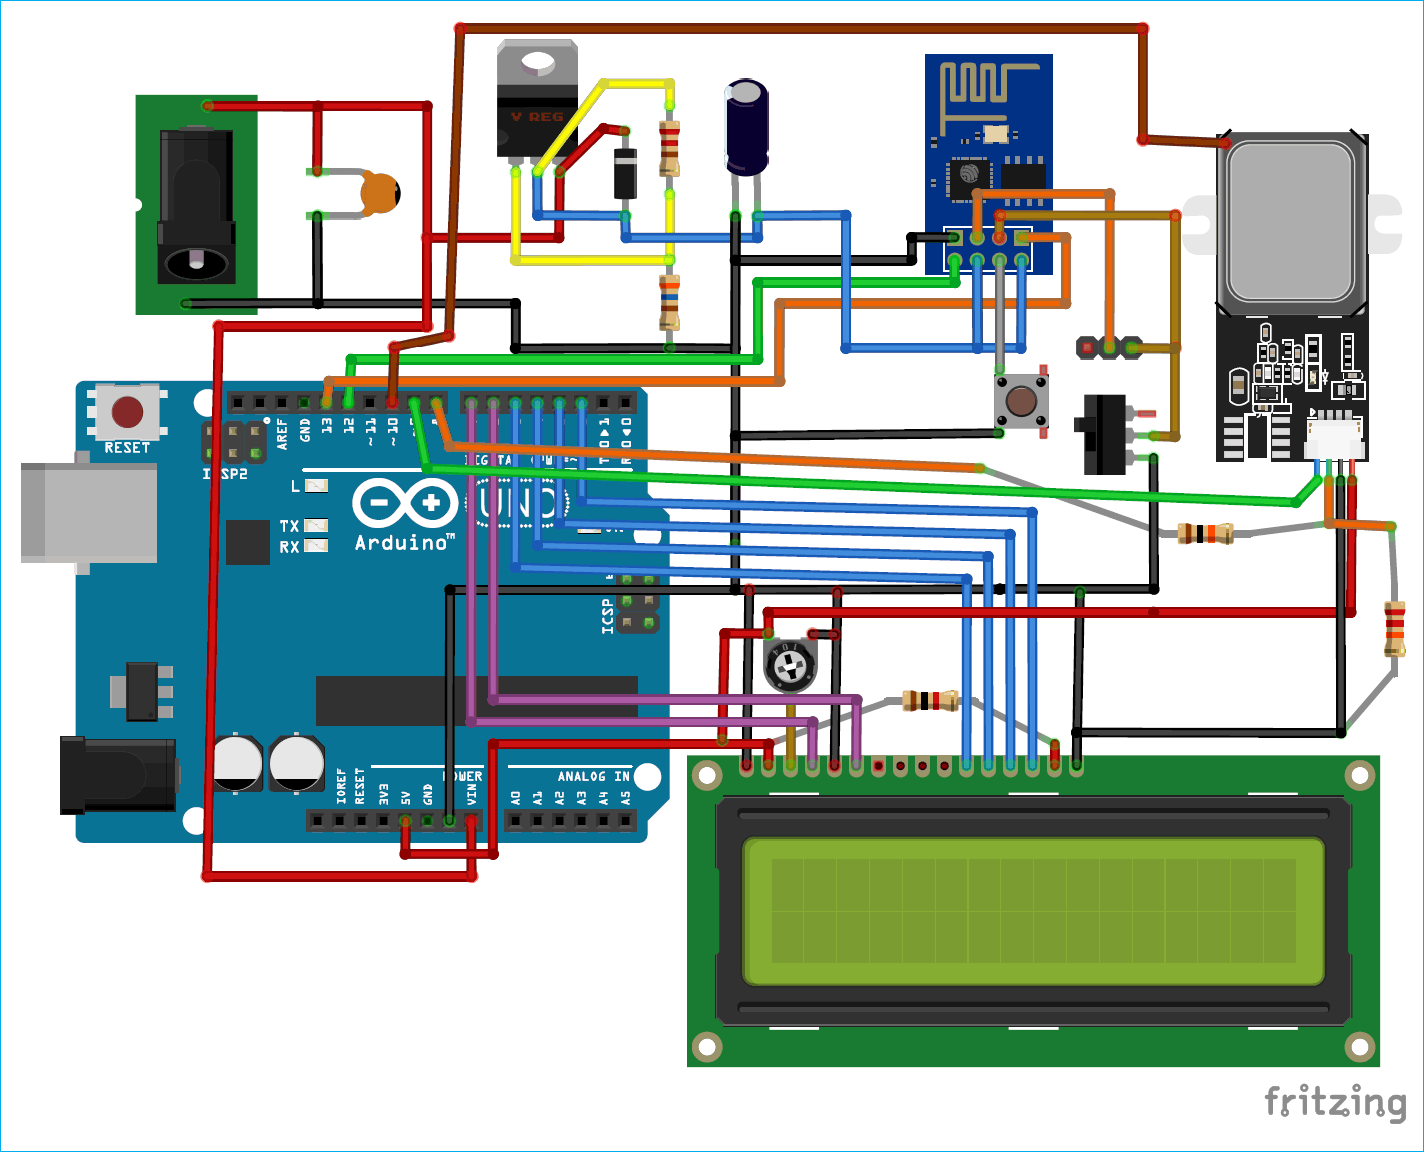 Circuit Diagram for IoT based Biometric Attendance system using Arduino and Thingsboard